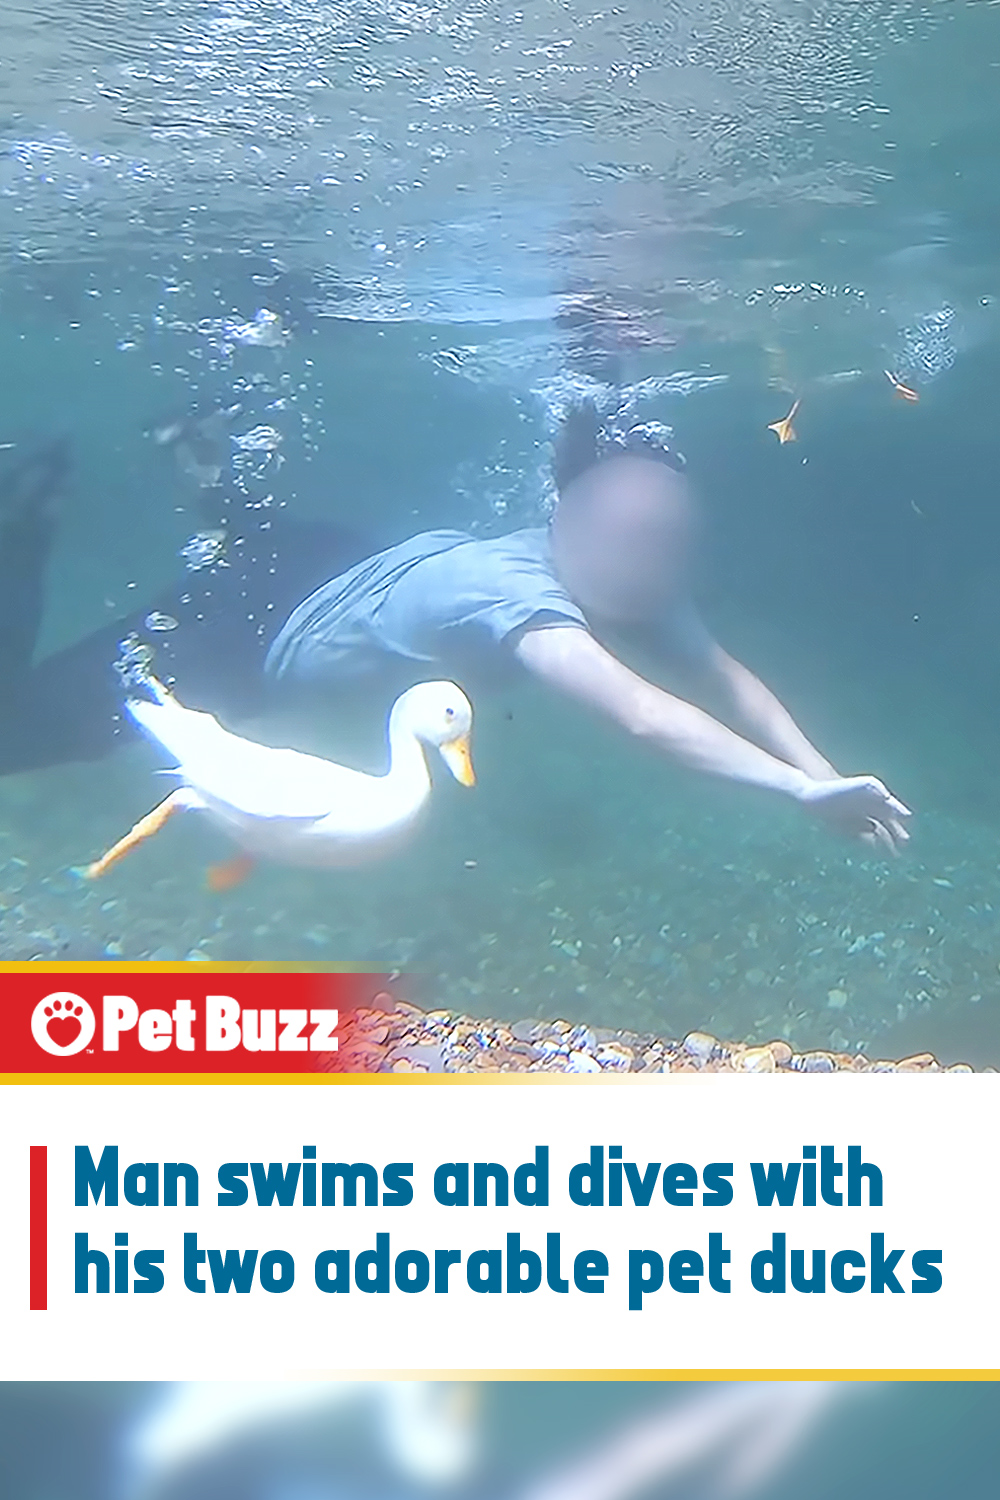 Man swims and dives with his two adorable pet ducks